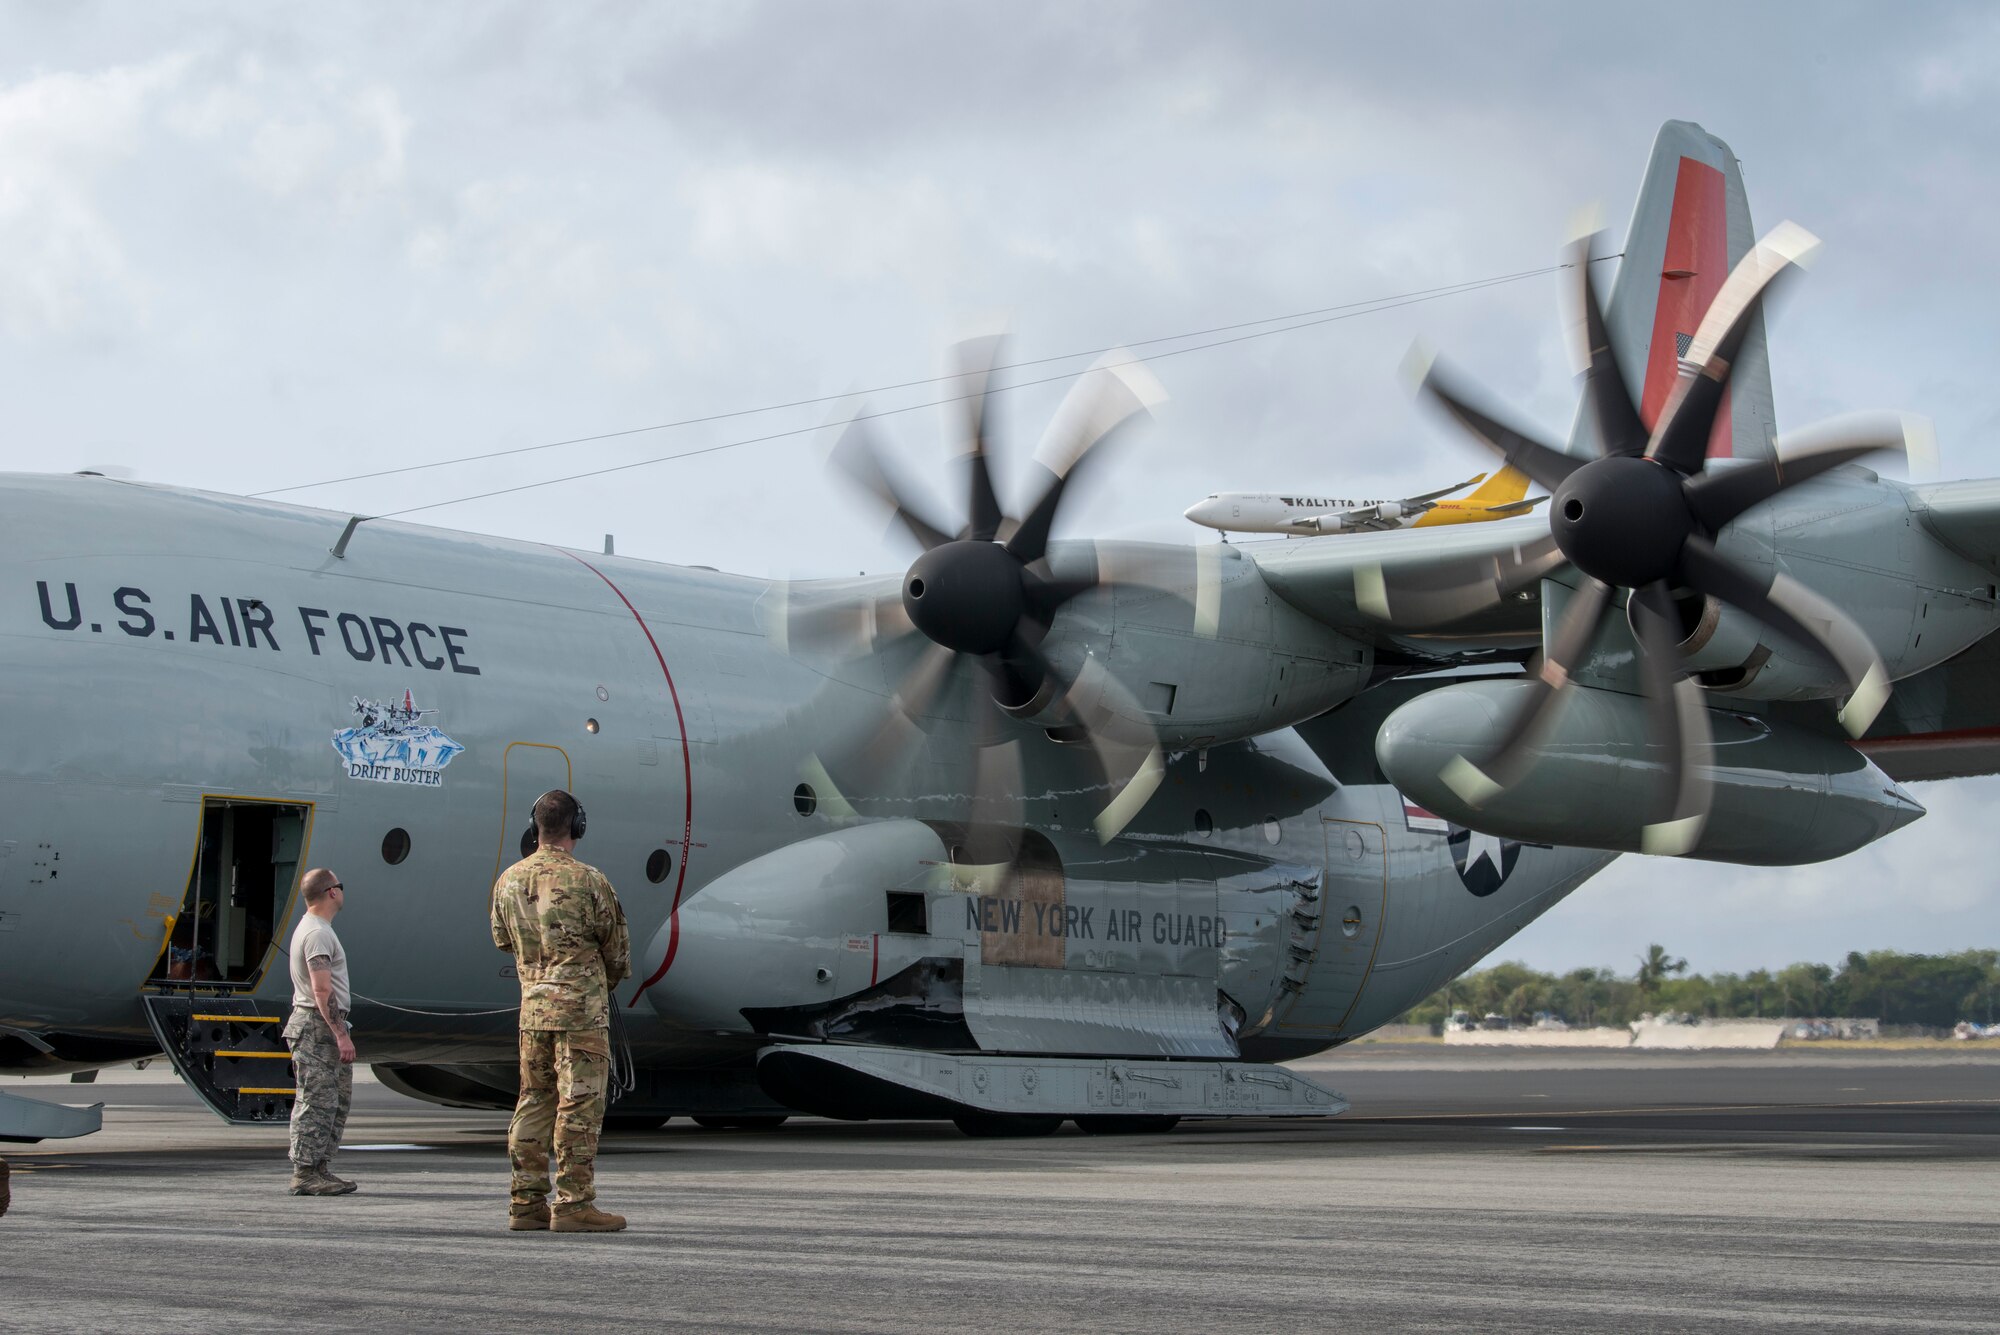 Airmen assigned to the 109th Airlift Wing, Stratton Air National Guard Base, New York, performs pre-flight inspections on an LC-130 Hercules on the flightline at Joint Base Pearl Harbor-Hickam, Hawaii, March 7, 2020. The crew was supporting Operation DEEP FREEZE. ODF is one of many operations in the Indo-Pacific in which the U.S. military promotes security and stability across the region. (U.S. Air Force photo by Staff Sgt. Mikaley Kline)